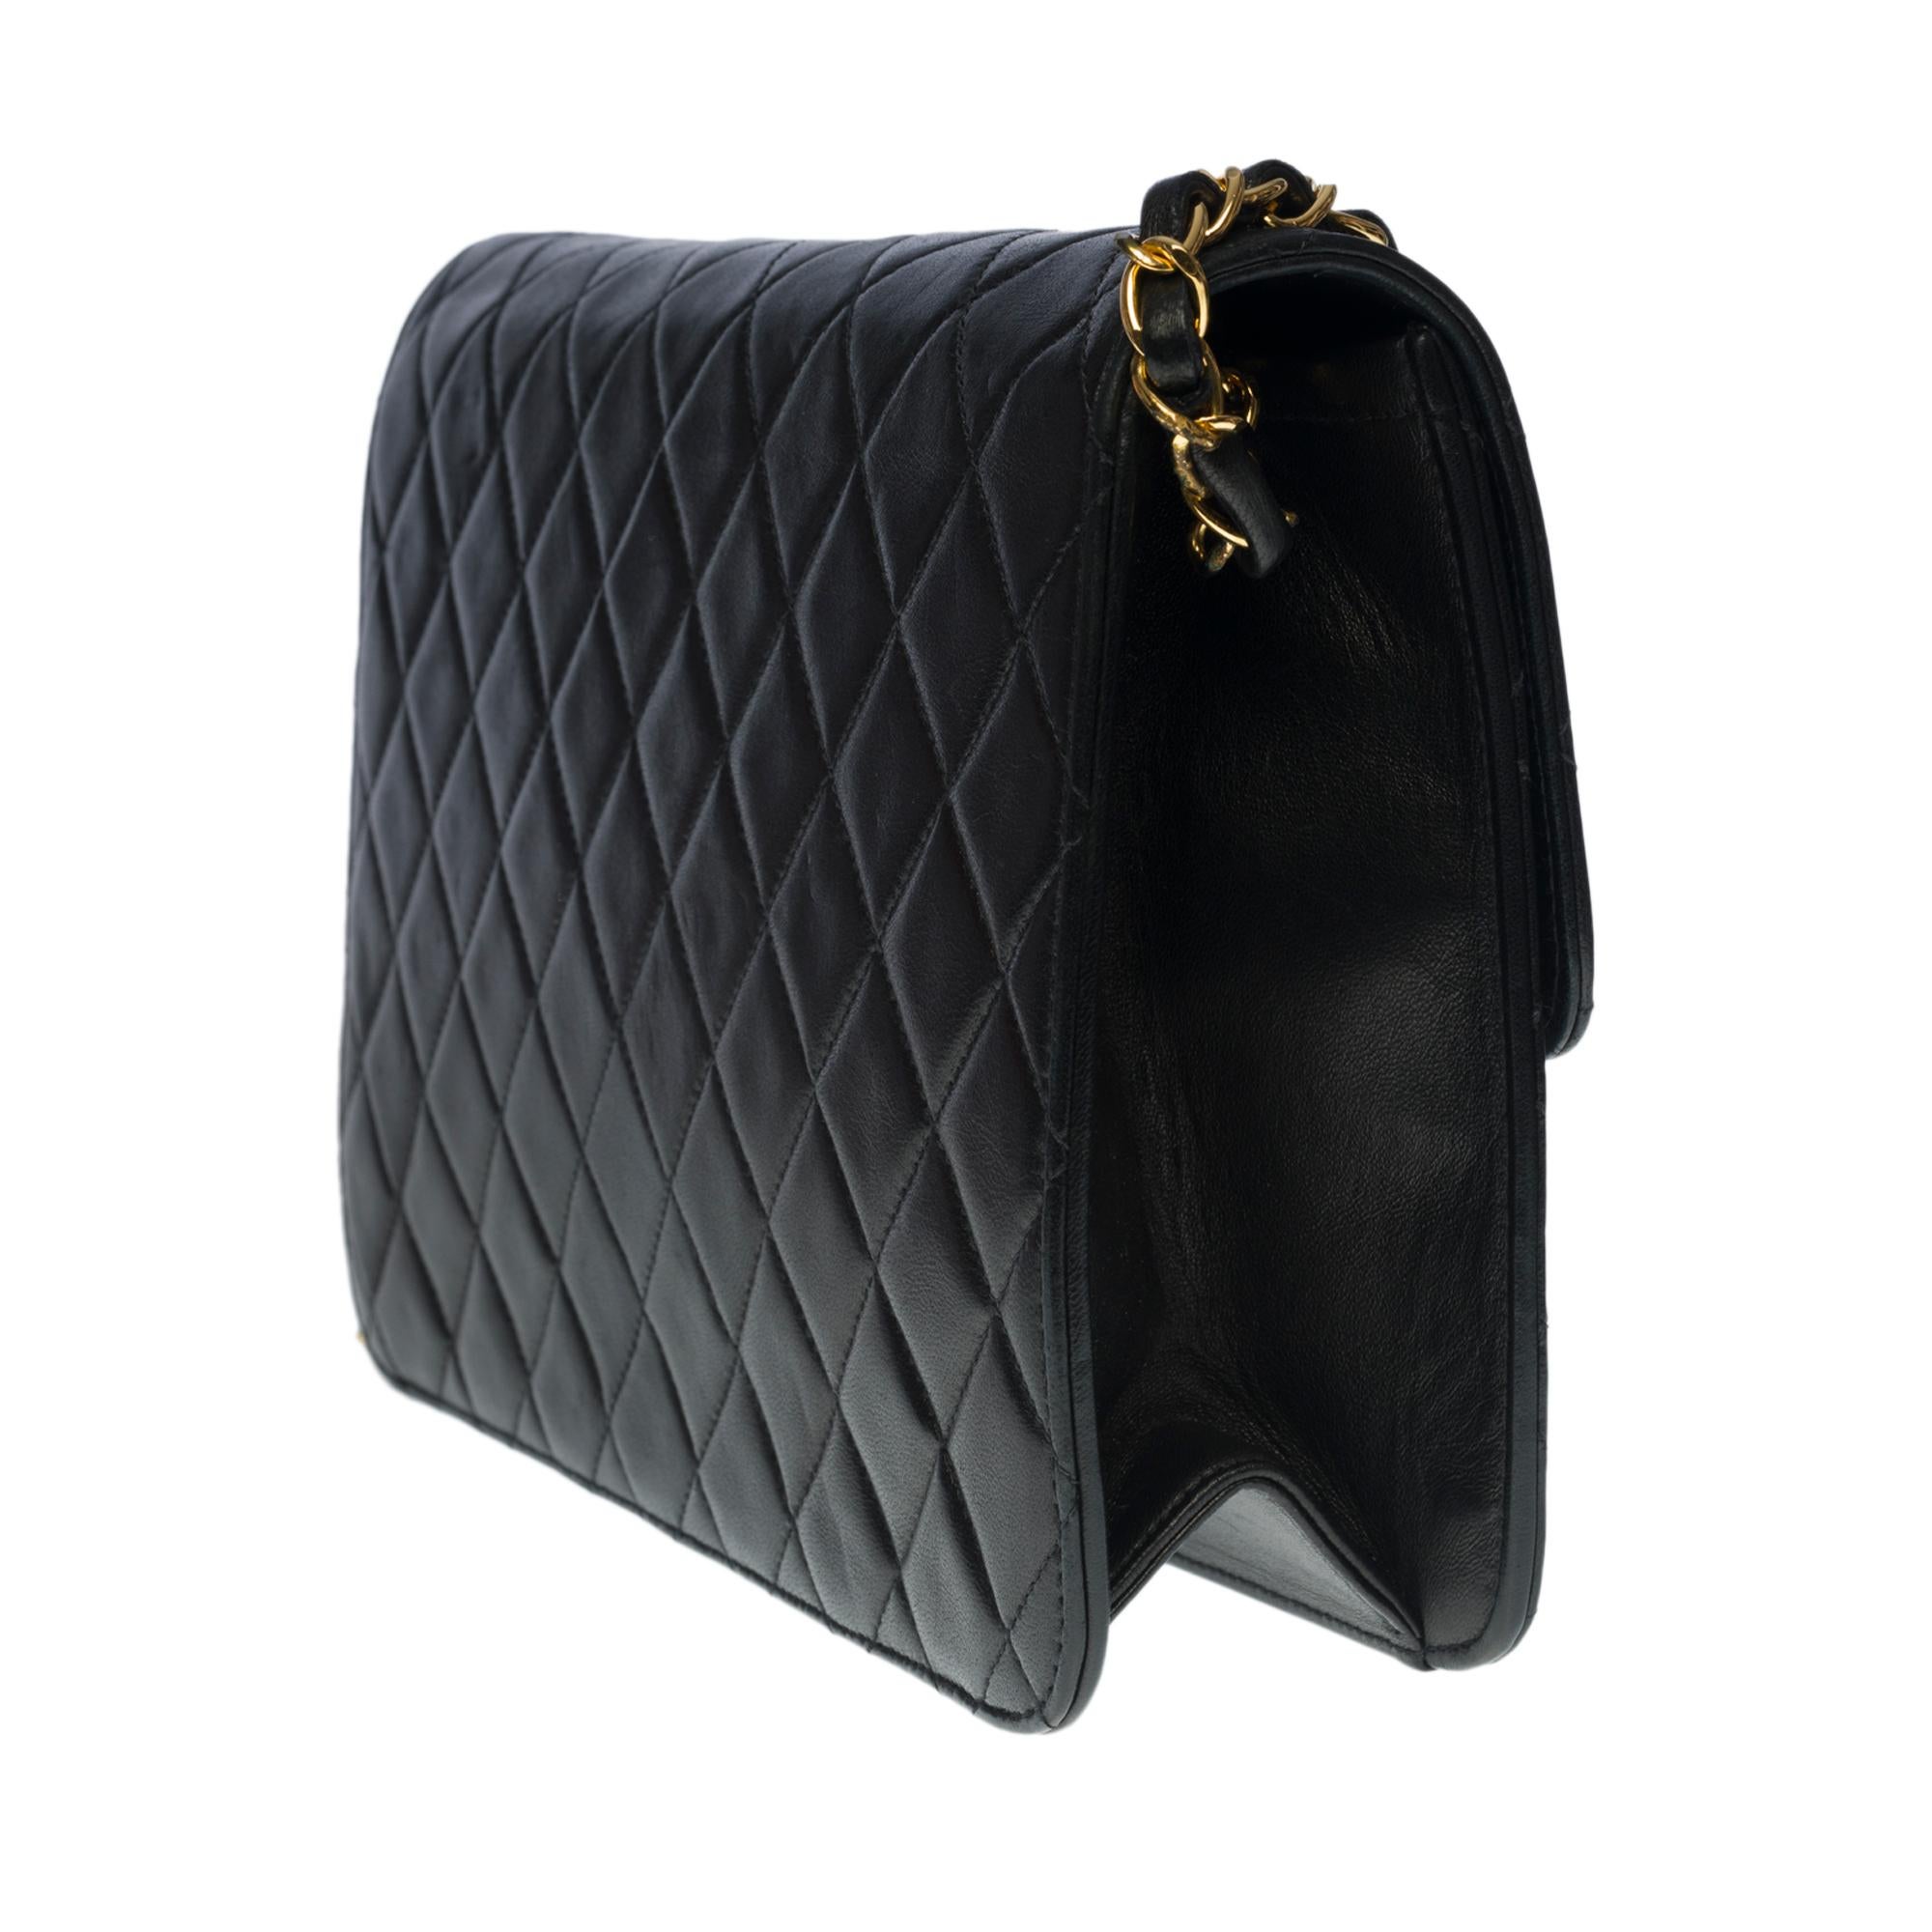 Women's Amazing Chanel Classic shoulder flap bag in black quilted lambskin, GHW